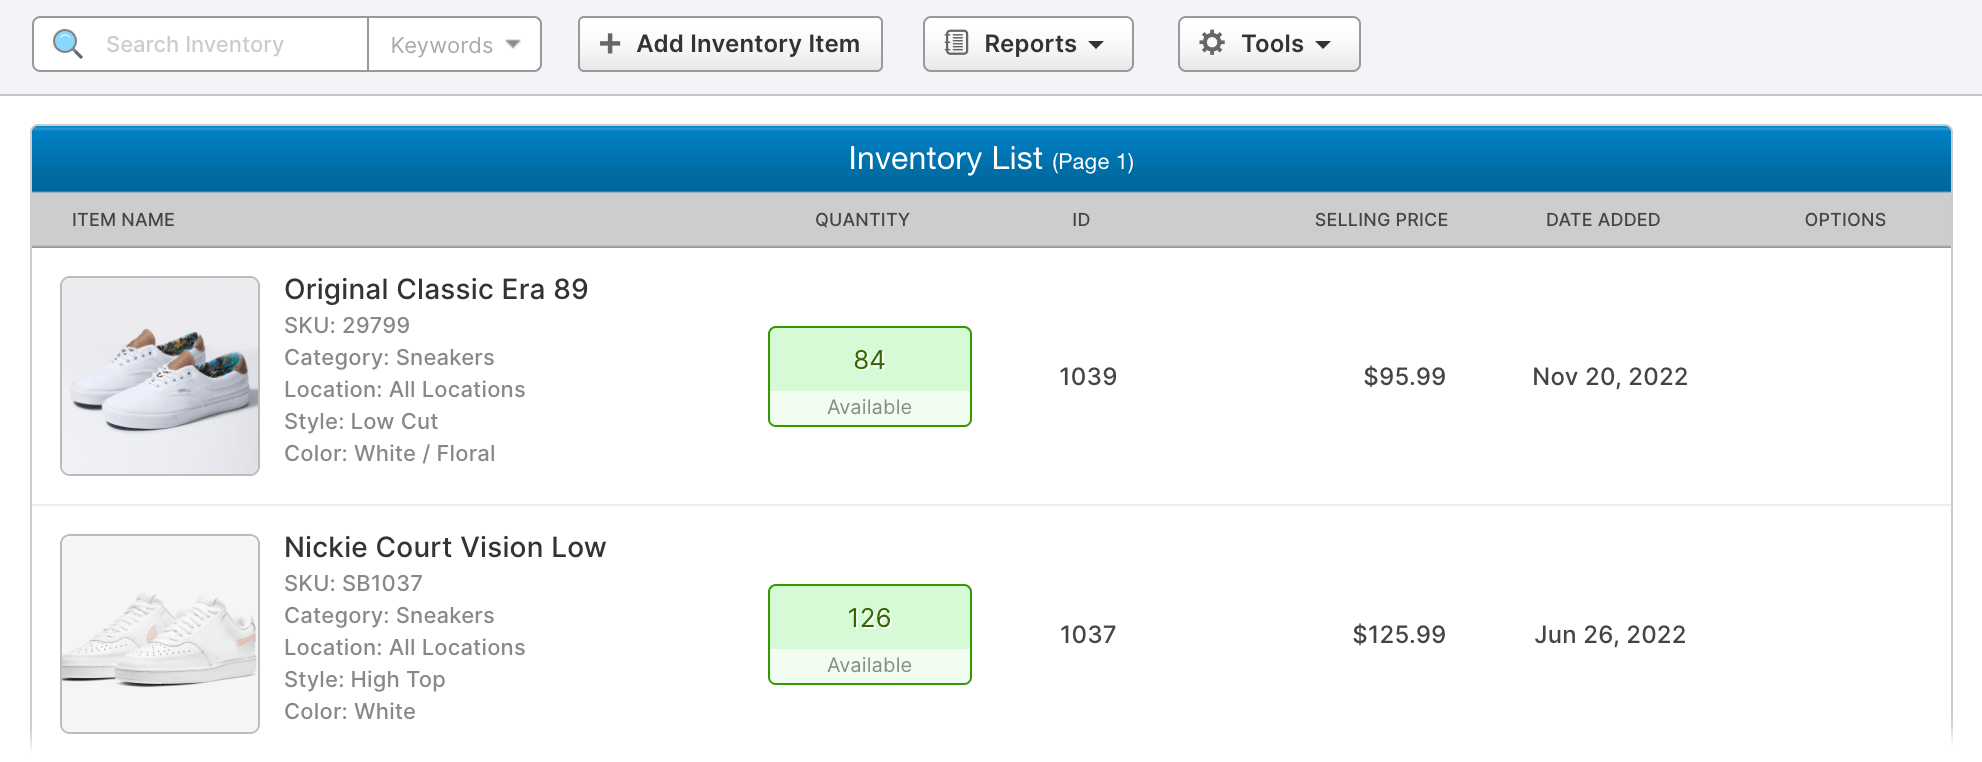 Inventory list view